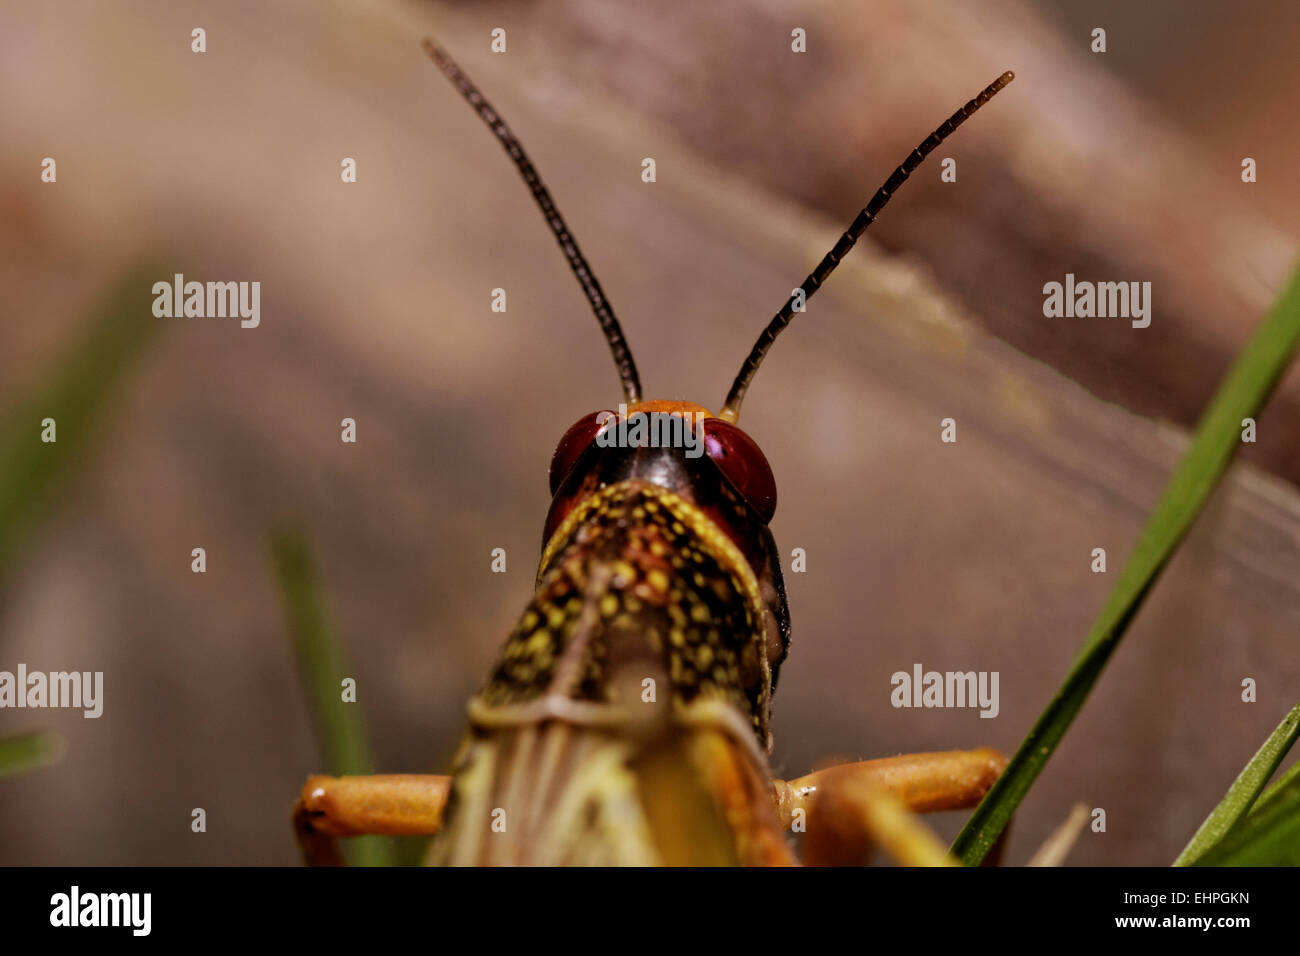 one locust eating the grass in the nature Stock Photo